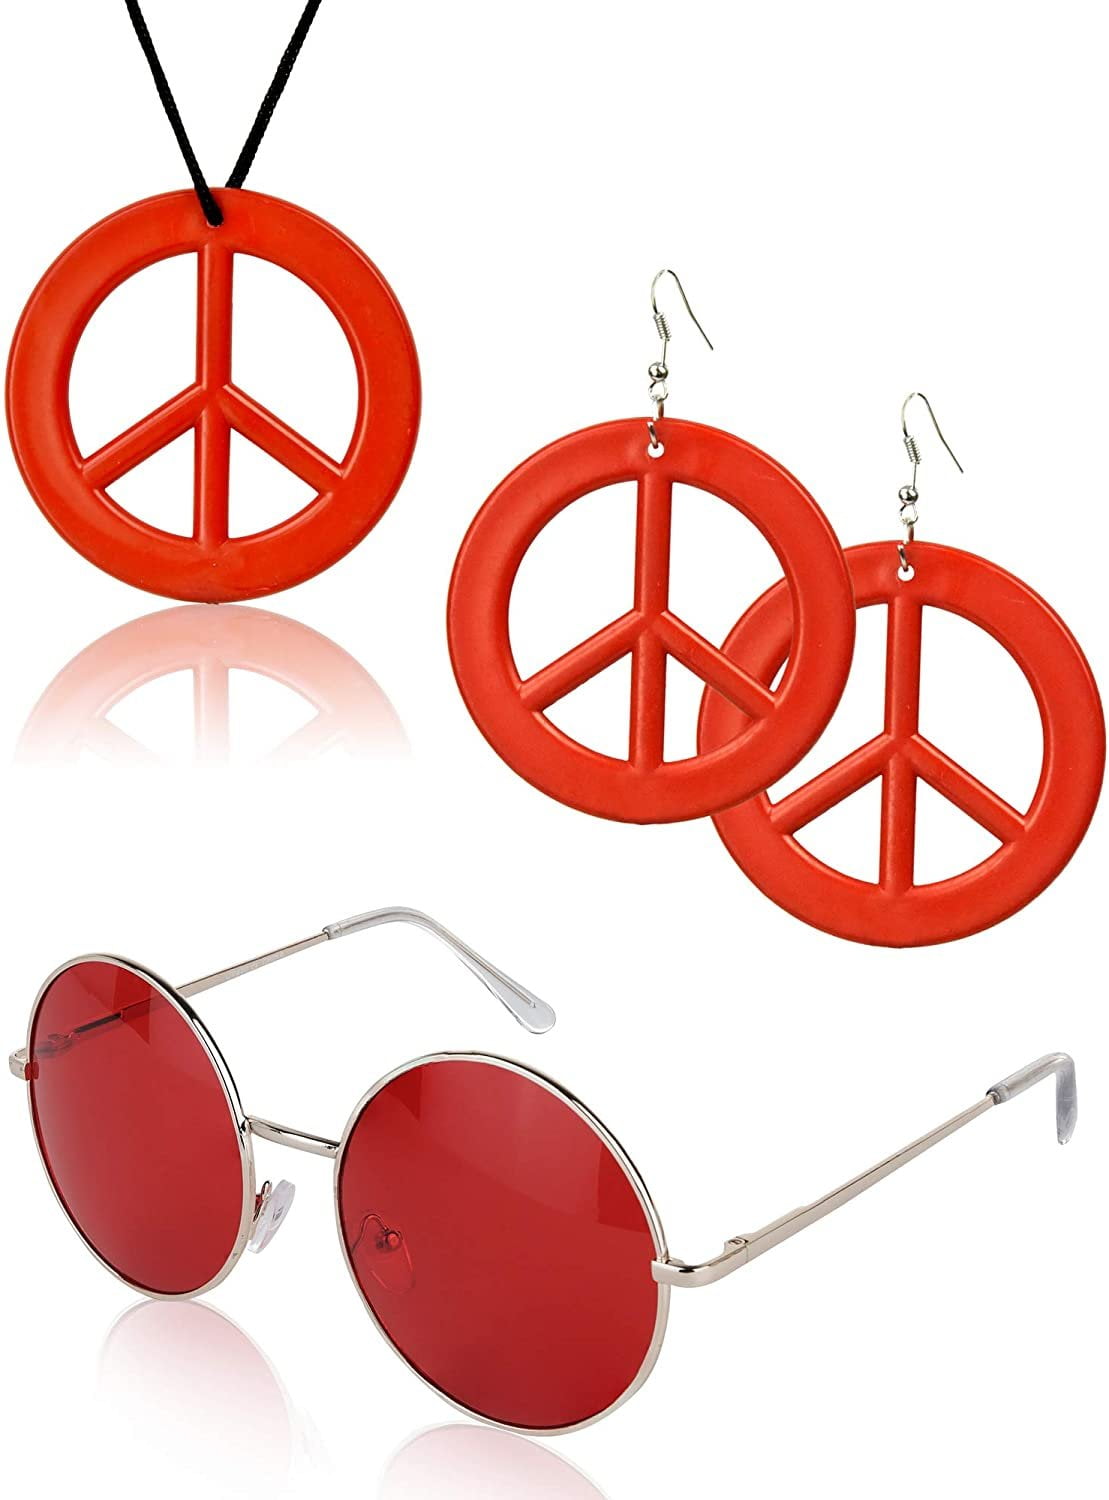 Hippie Accessories Round Glasses Peace Sign Necklace Earrings 60's